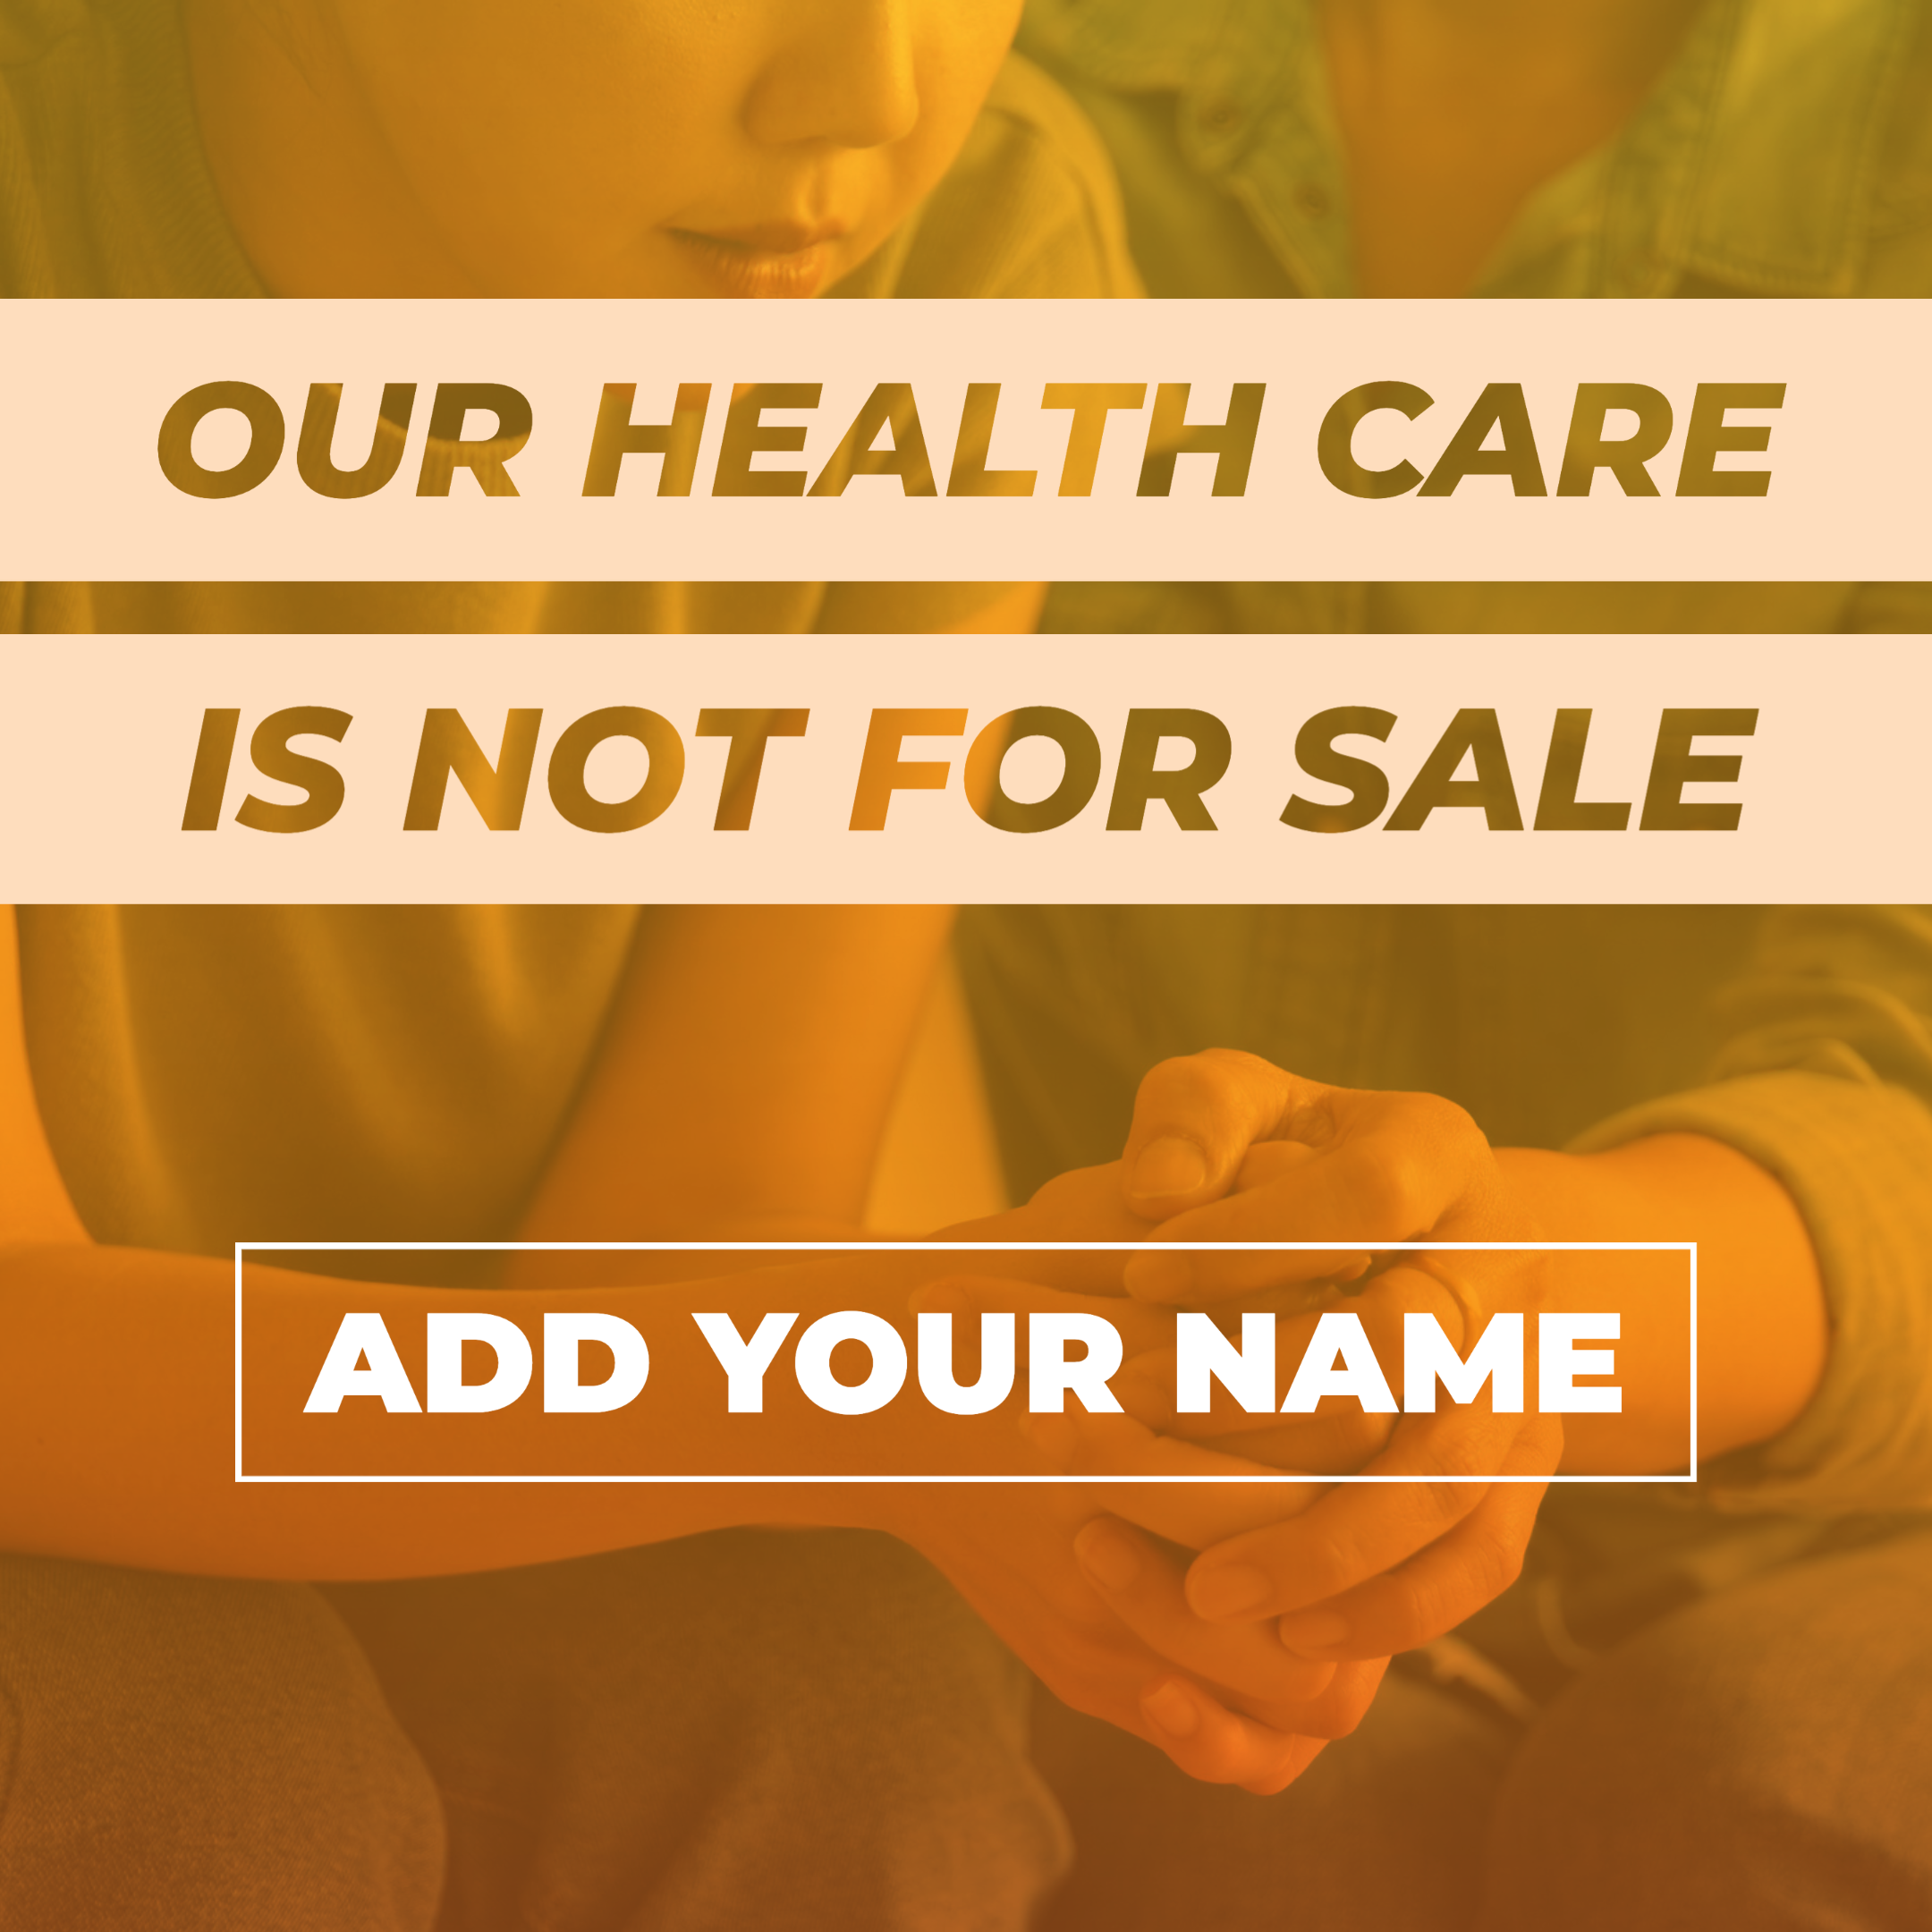 SIGN: Our Health Care is Not For Sale